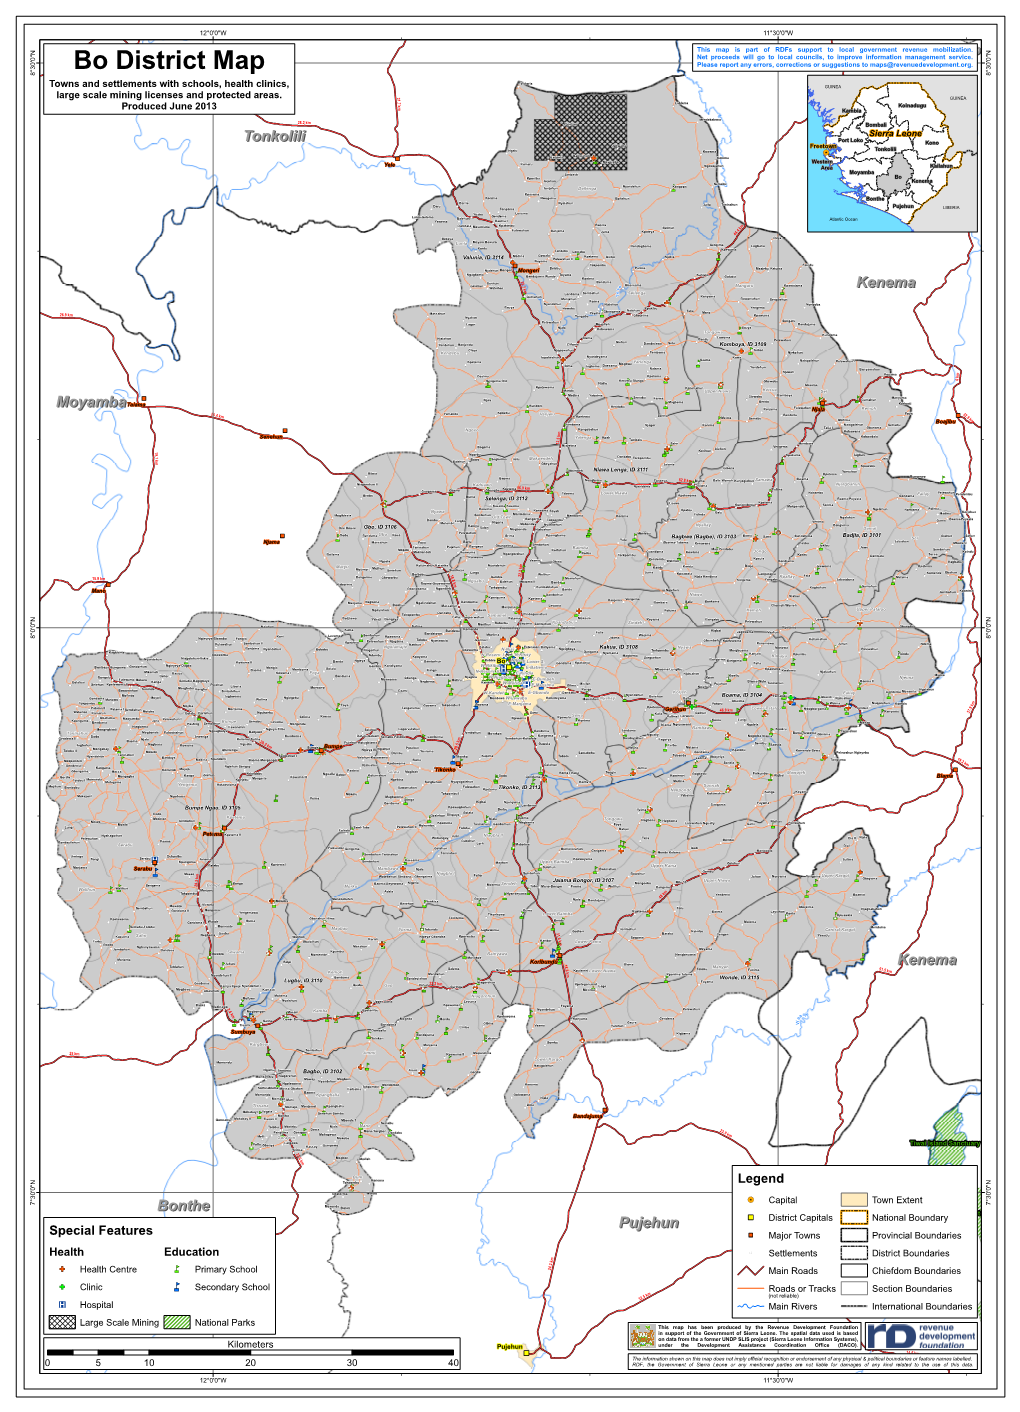 Bo District Map 8 Victoria Towns and Settlements with Schools, Health Clinics, !( GUINEA